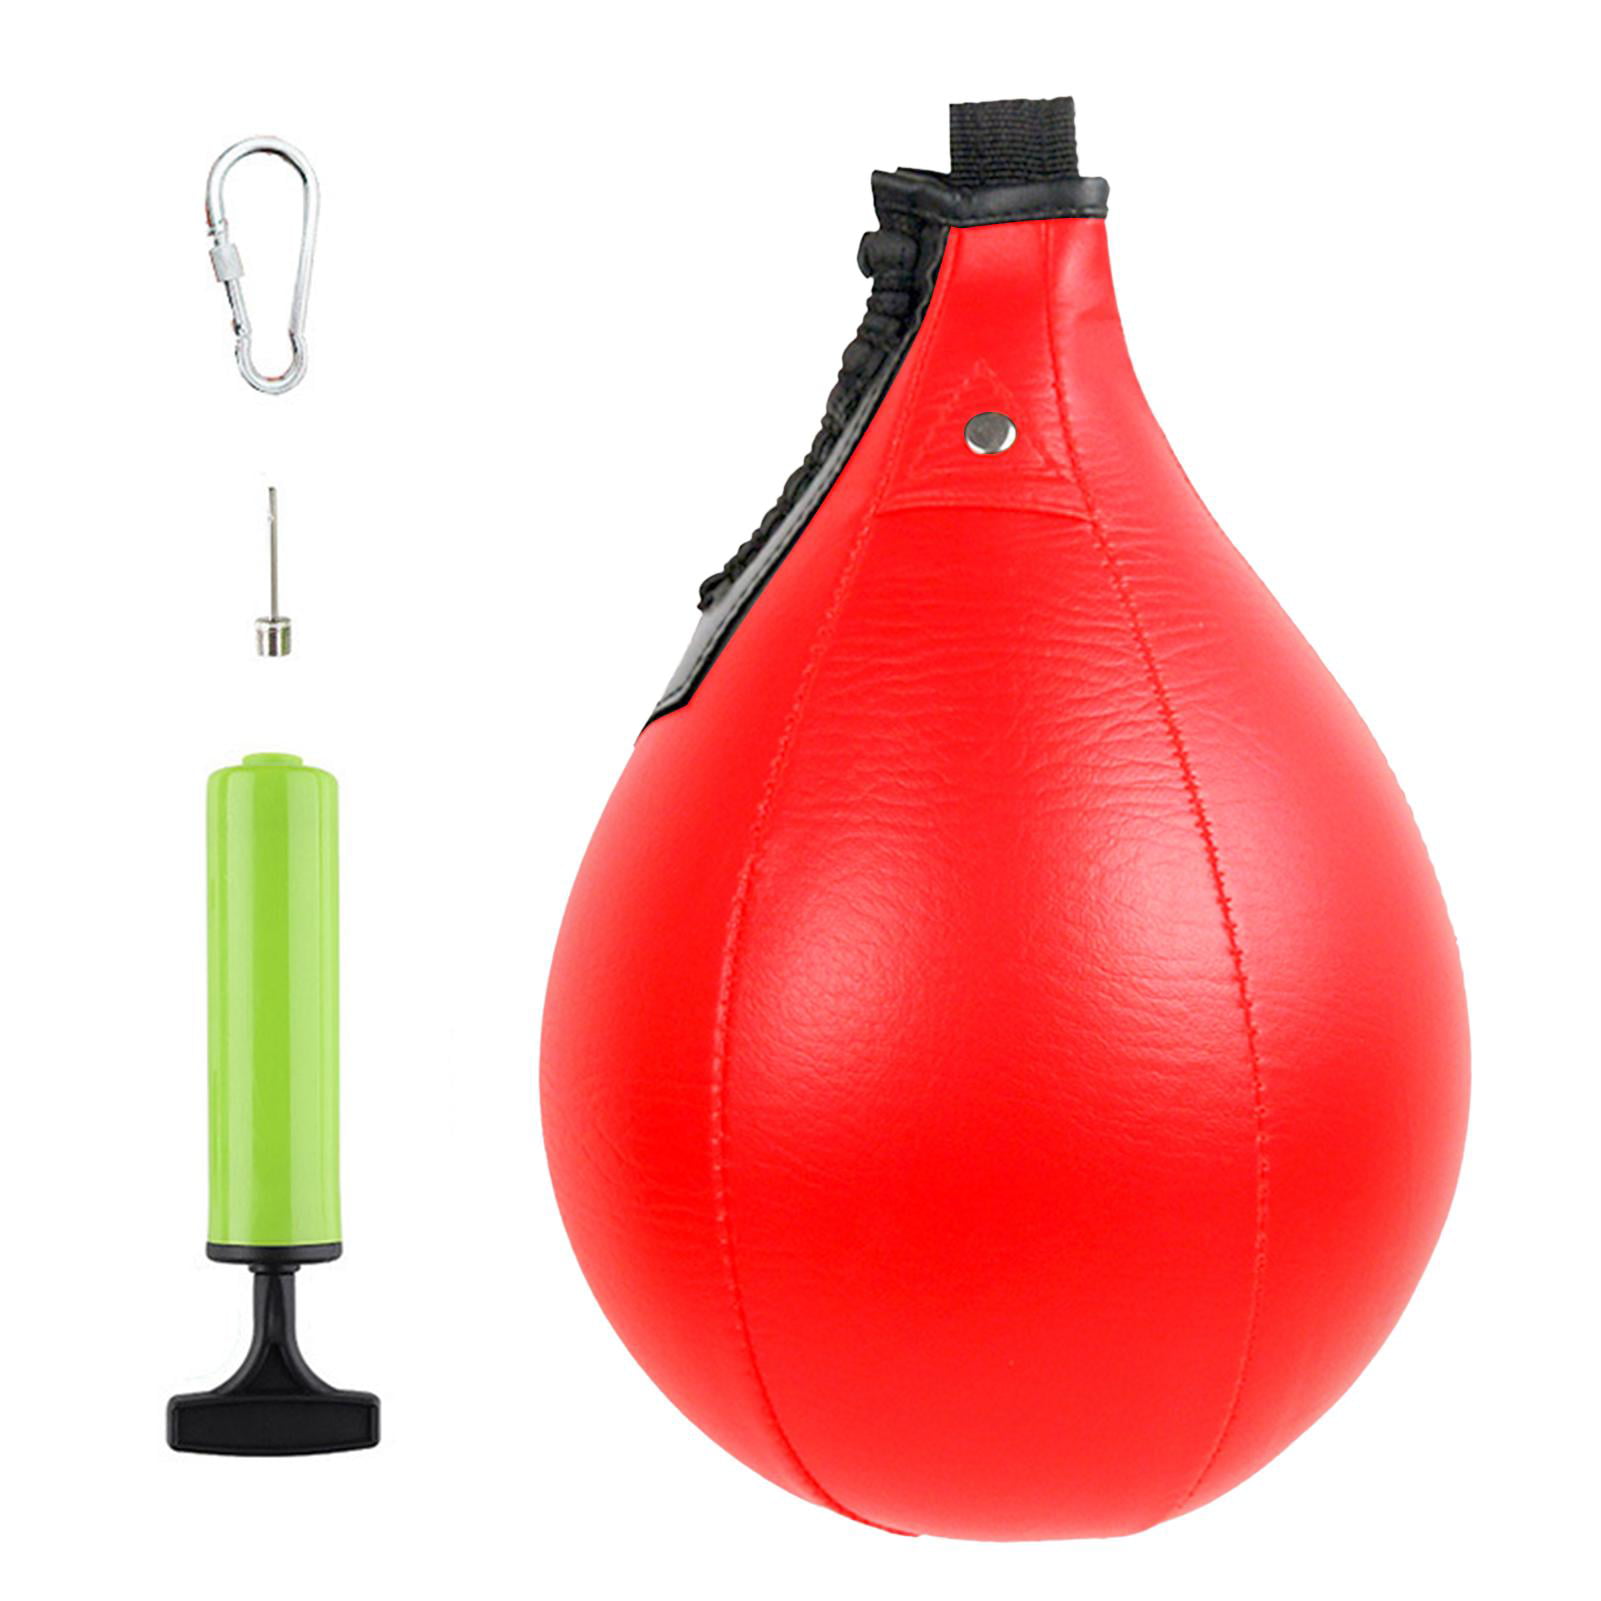 Desk Punching Bag Speed Ball Training Fitness Boxing Balls Stress Release Bags 